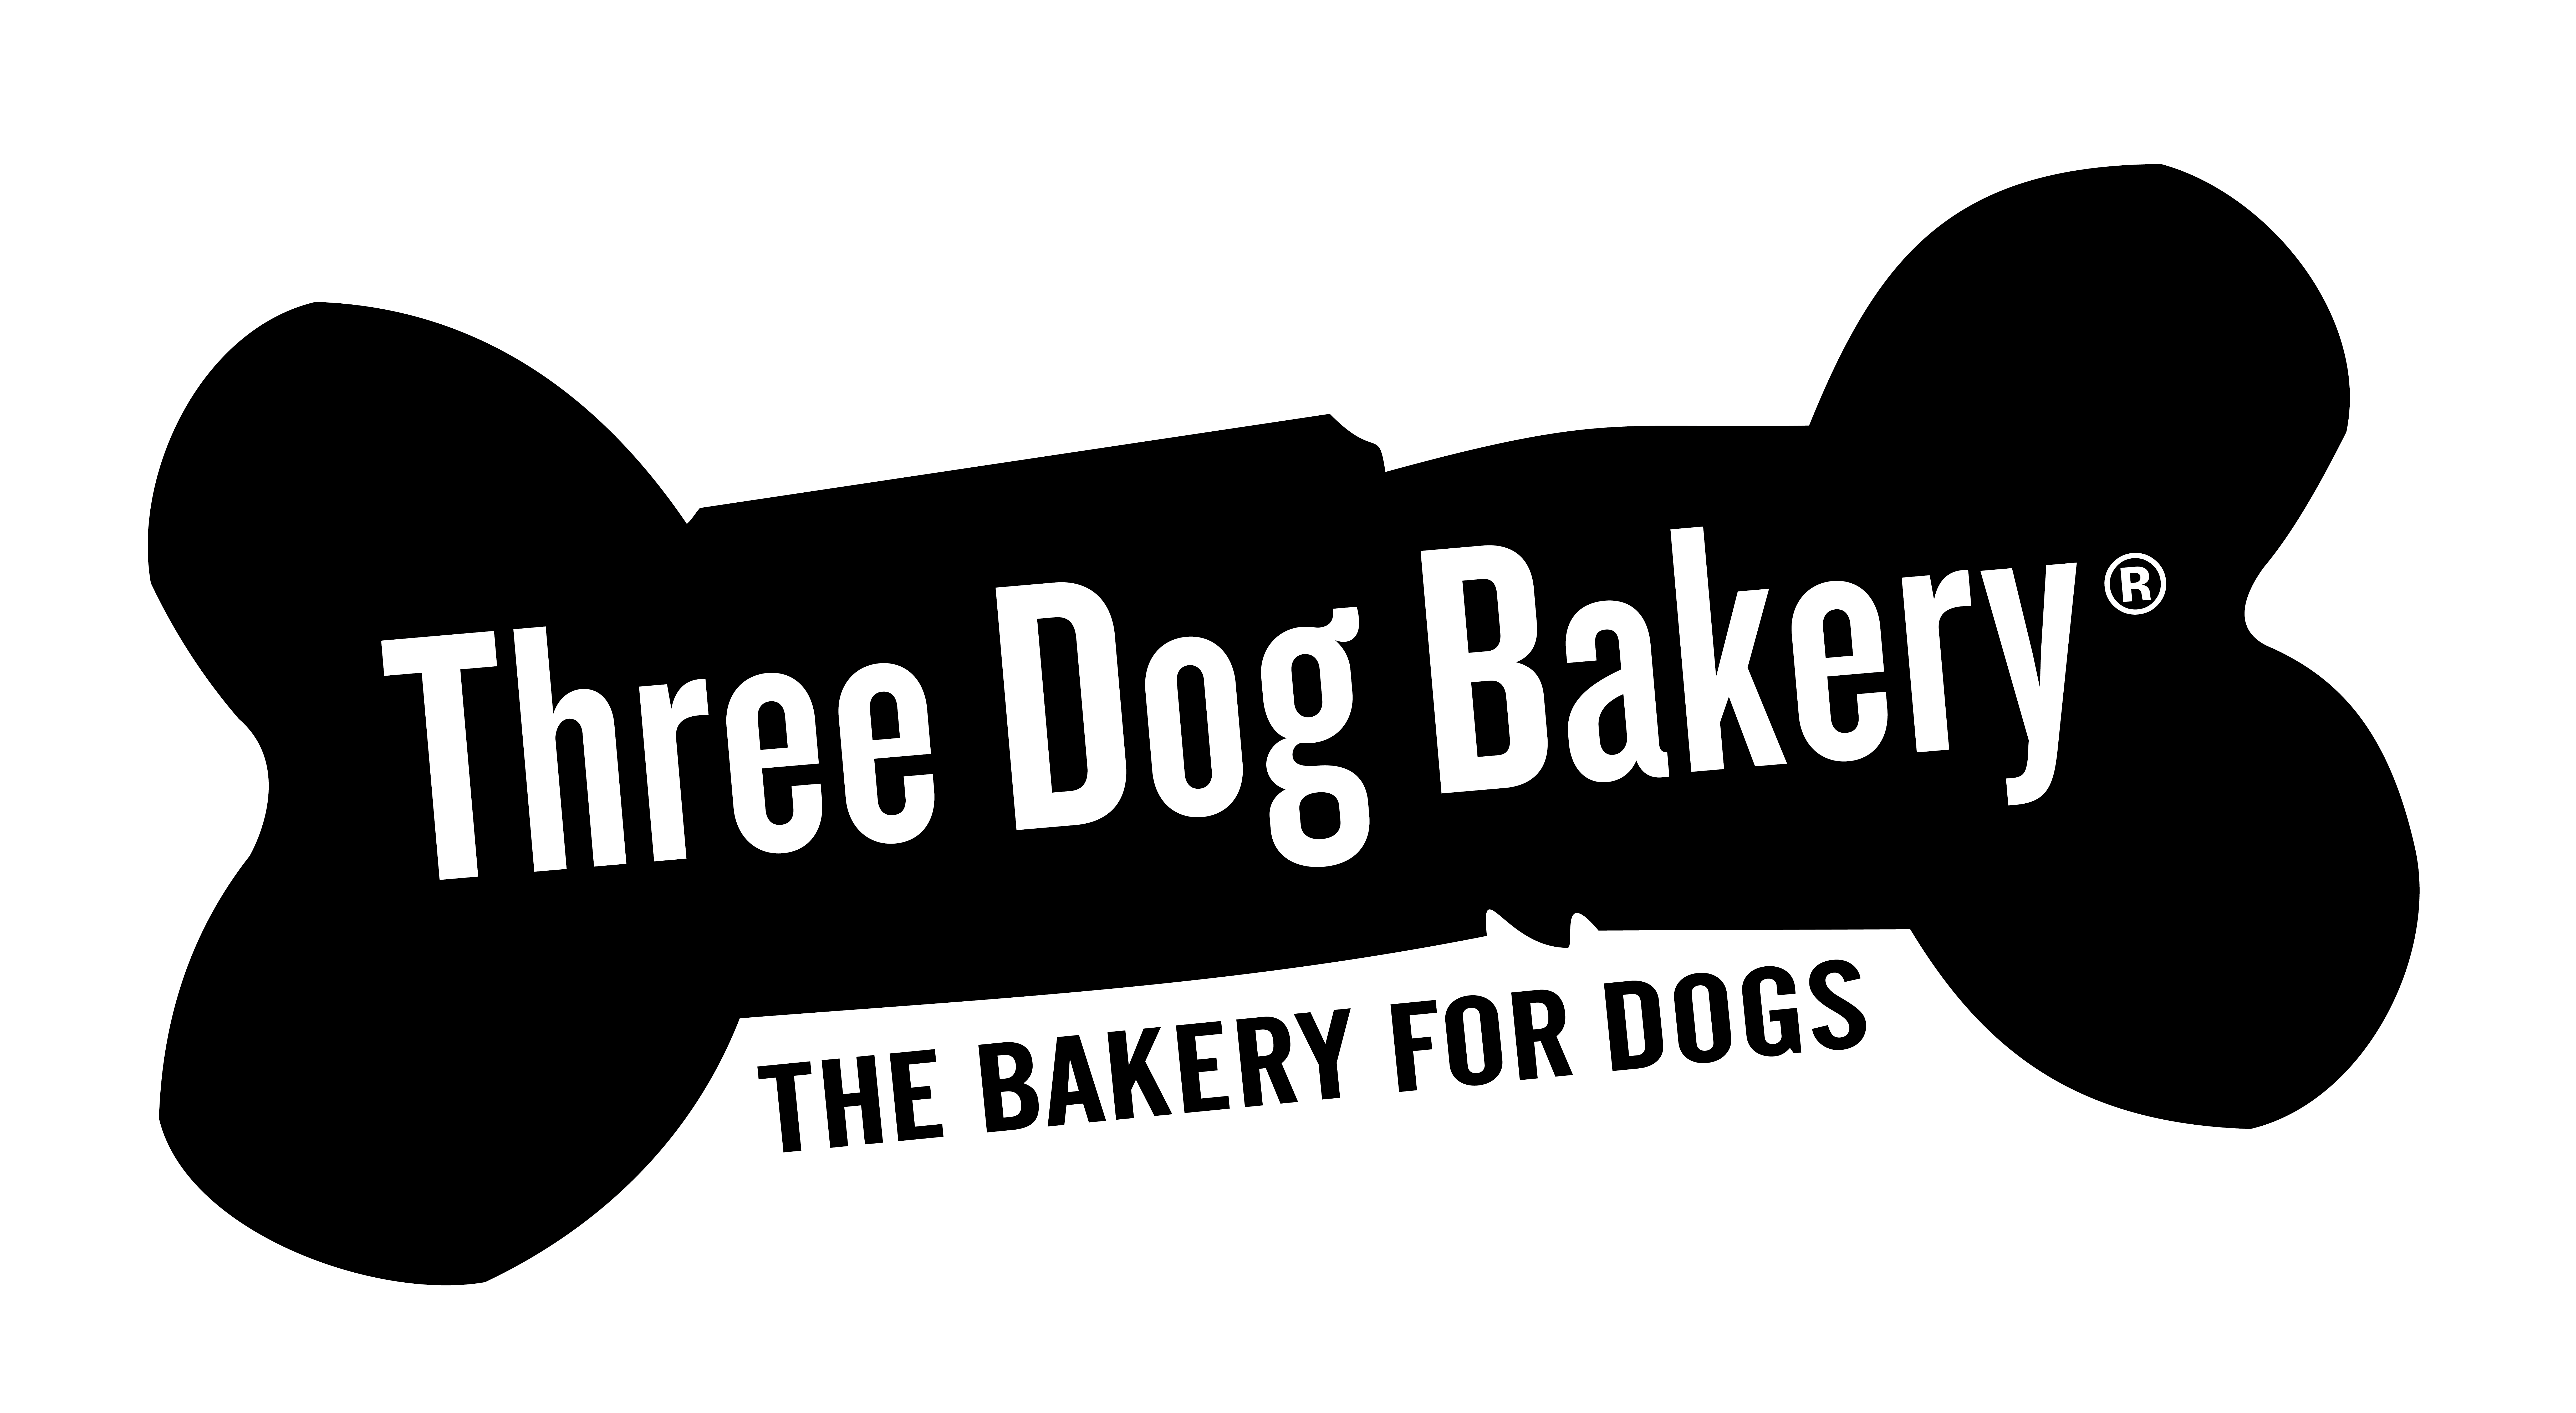 Three Dog Bakery - The Bakery for Dogs